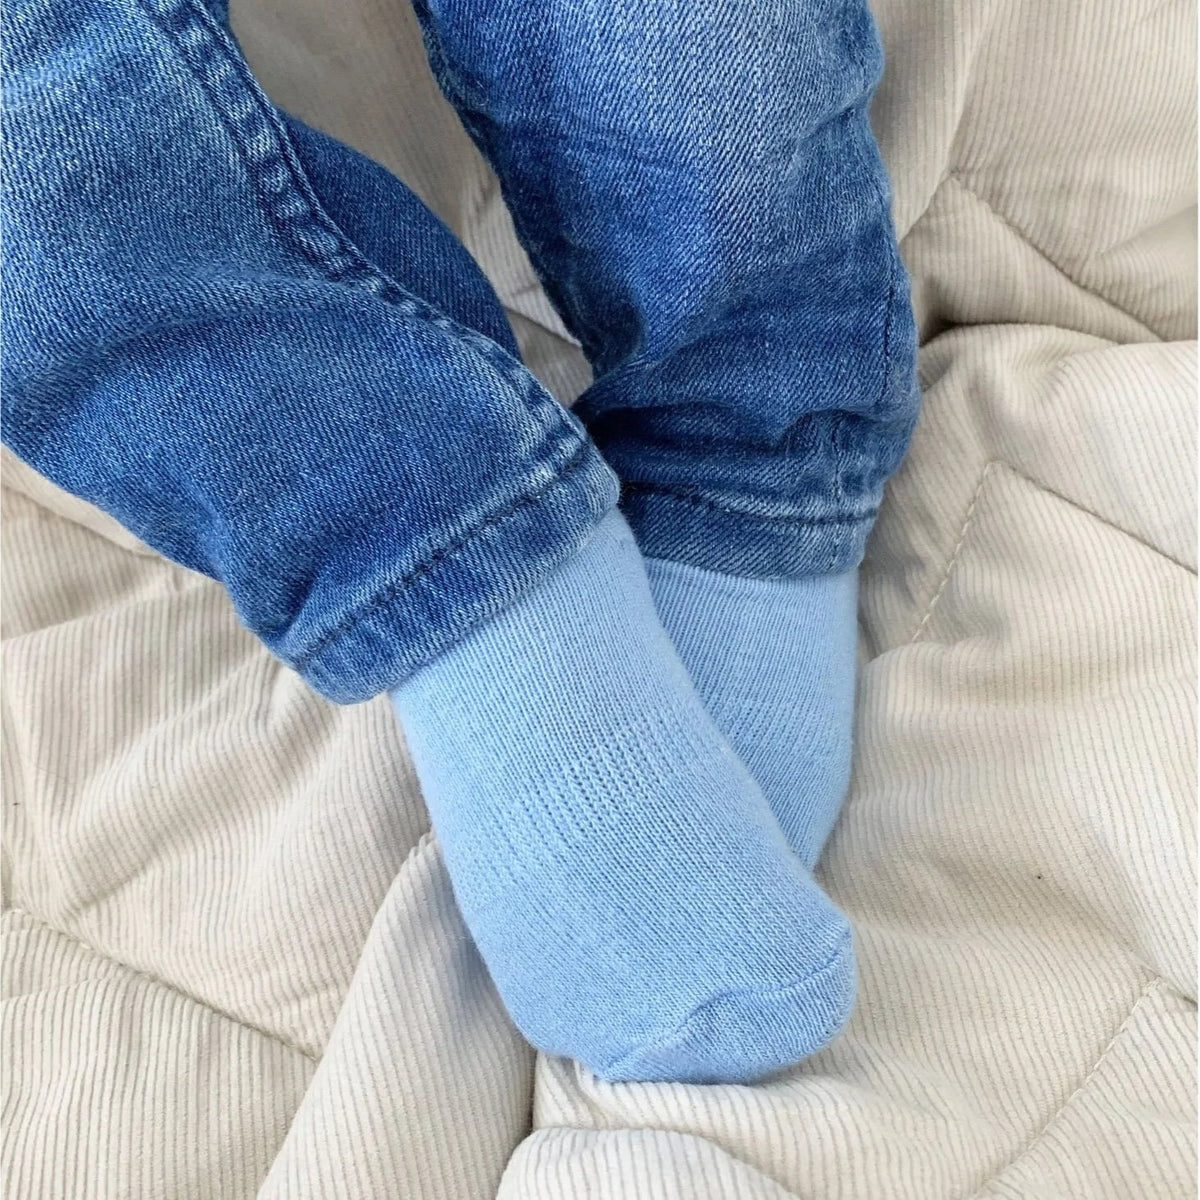 Talipes (clubfoot) Boots and Bar Socks - Non-Slip Stay on Baby and Toddler Socks - 5 Pack in Grey, Oatmeal & Blue